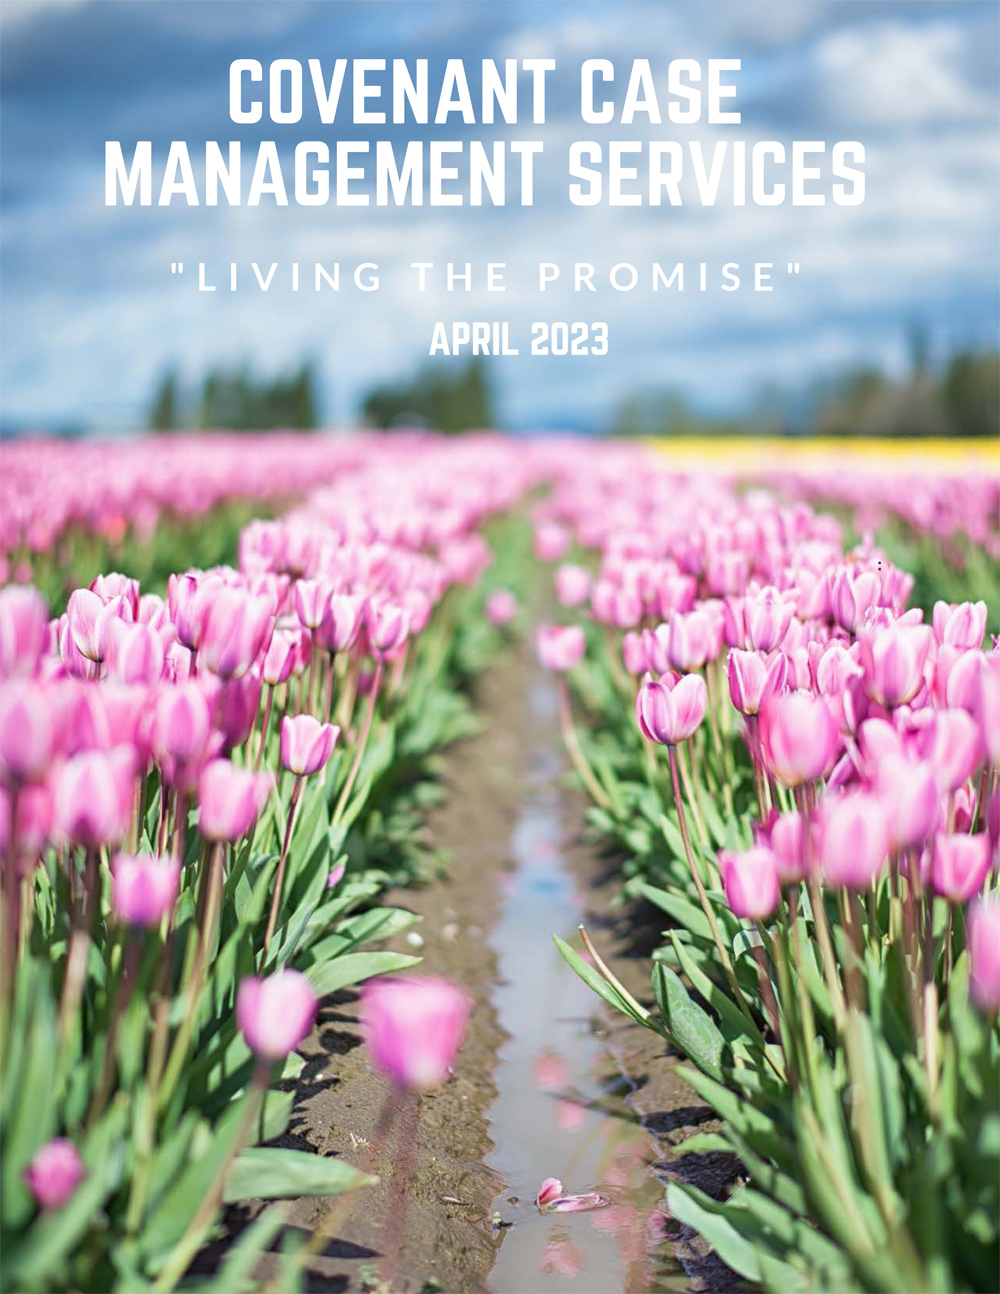 April 2023 Newsletter from Covenant Case Management Services